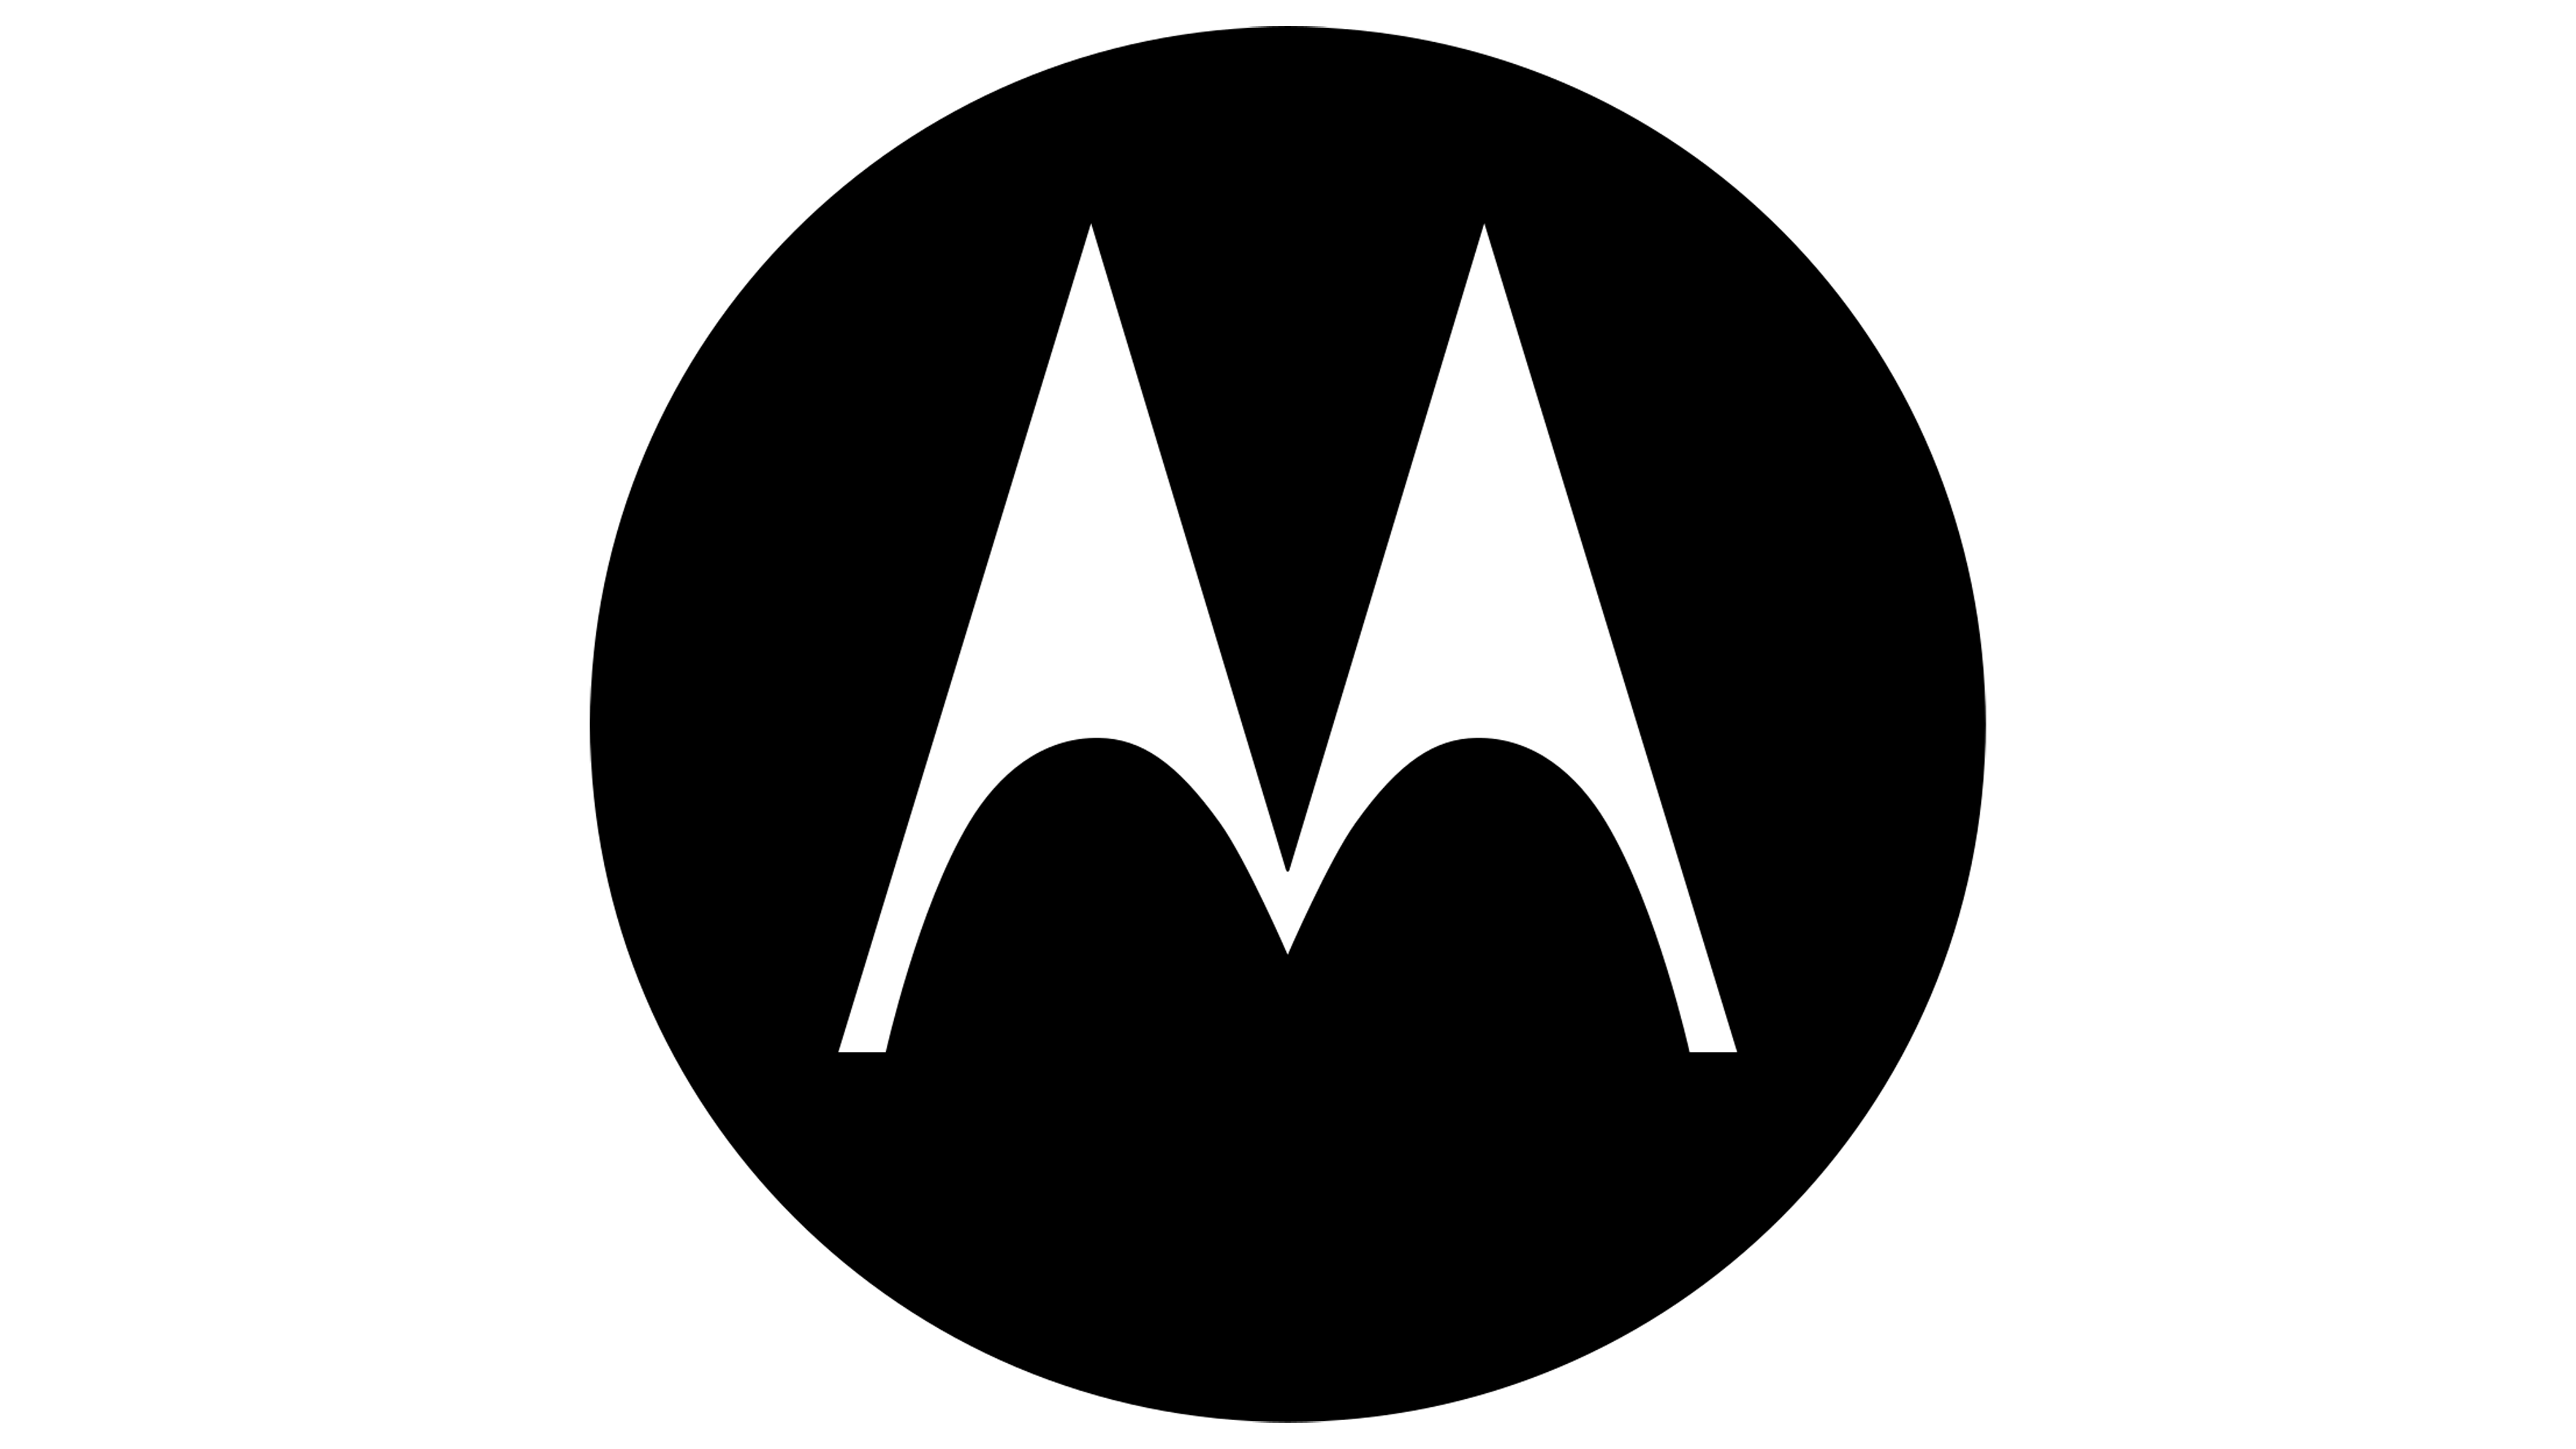 How To Draw Motorola Logo Step by Step - [4 Easy Phase]